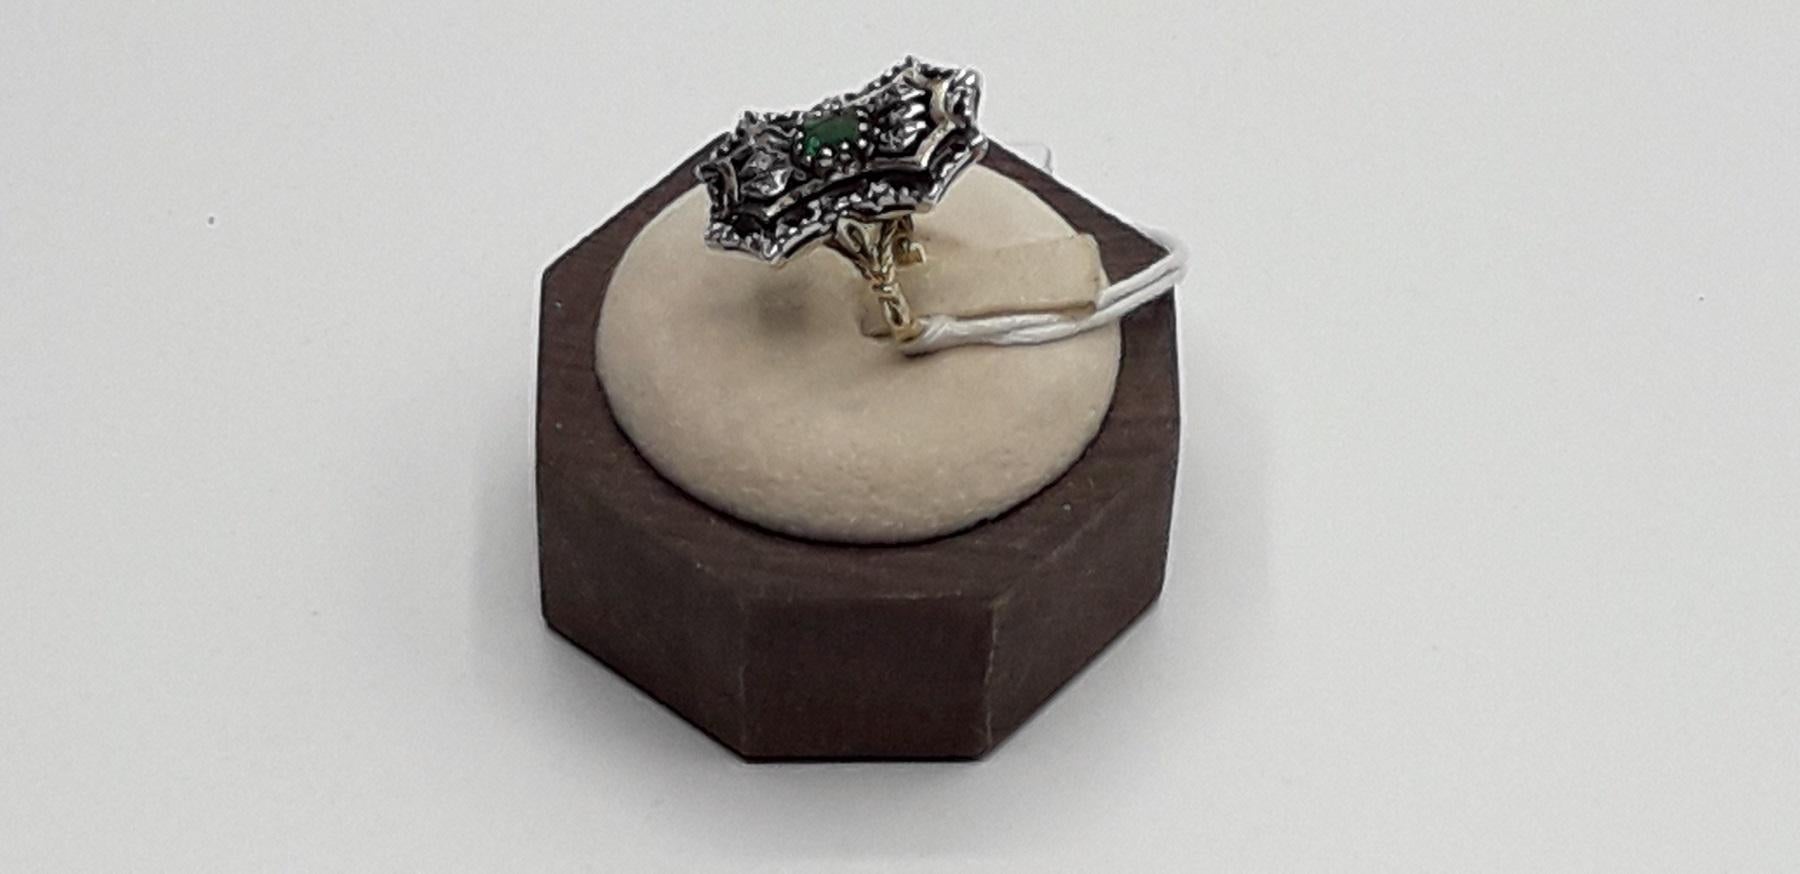 Emerald Diamonds Gold and Silver Dome Cocktail Ring, 1980s In Excellent Condition For Sale In Bosco Marengo, IT